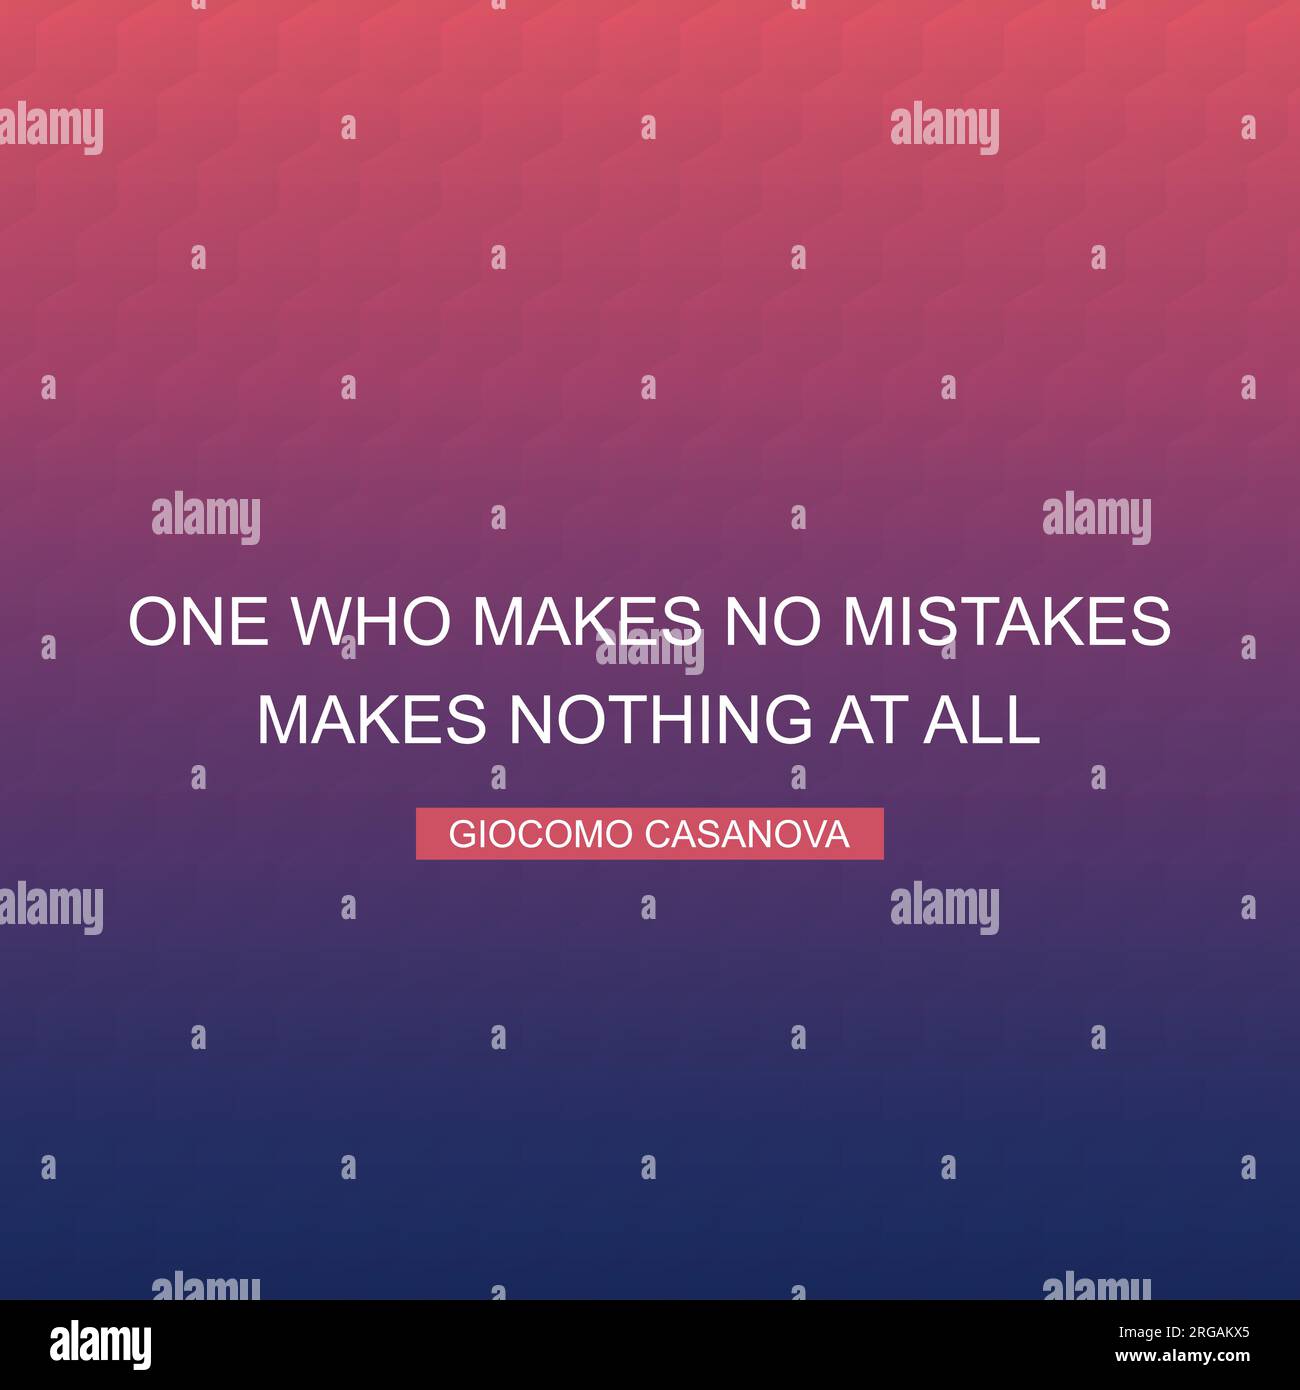 One Who Makes No Mistakes Makes Nothing at All - Inspirational Quote, Slogan, Saying Stock Vector